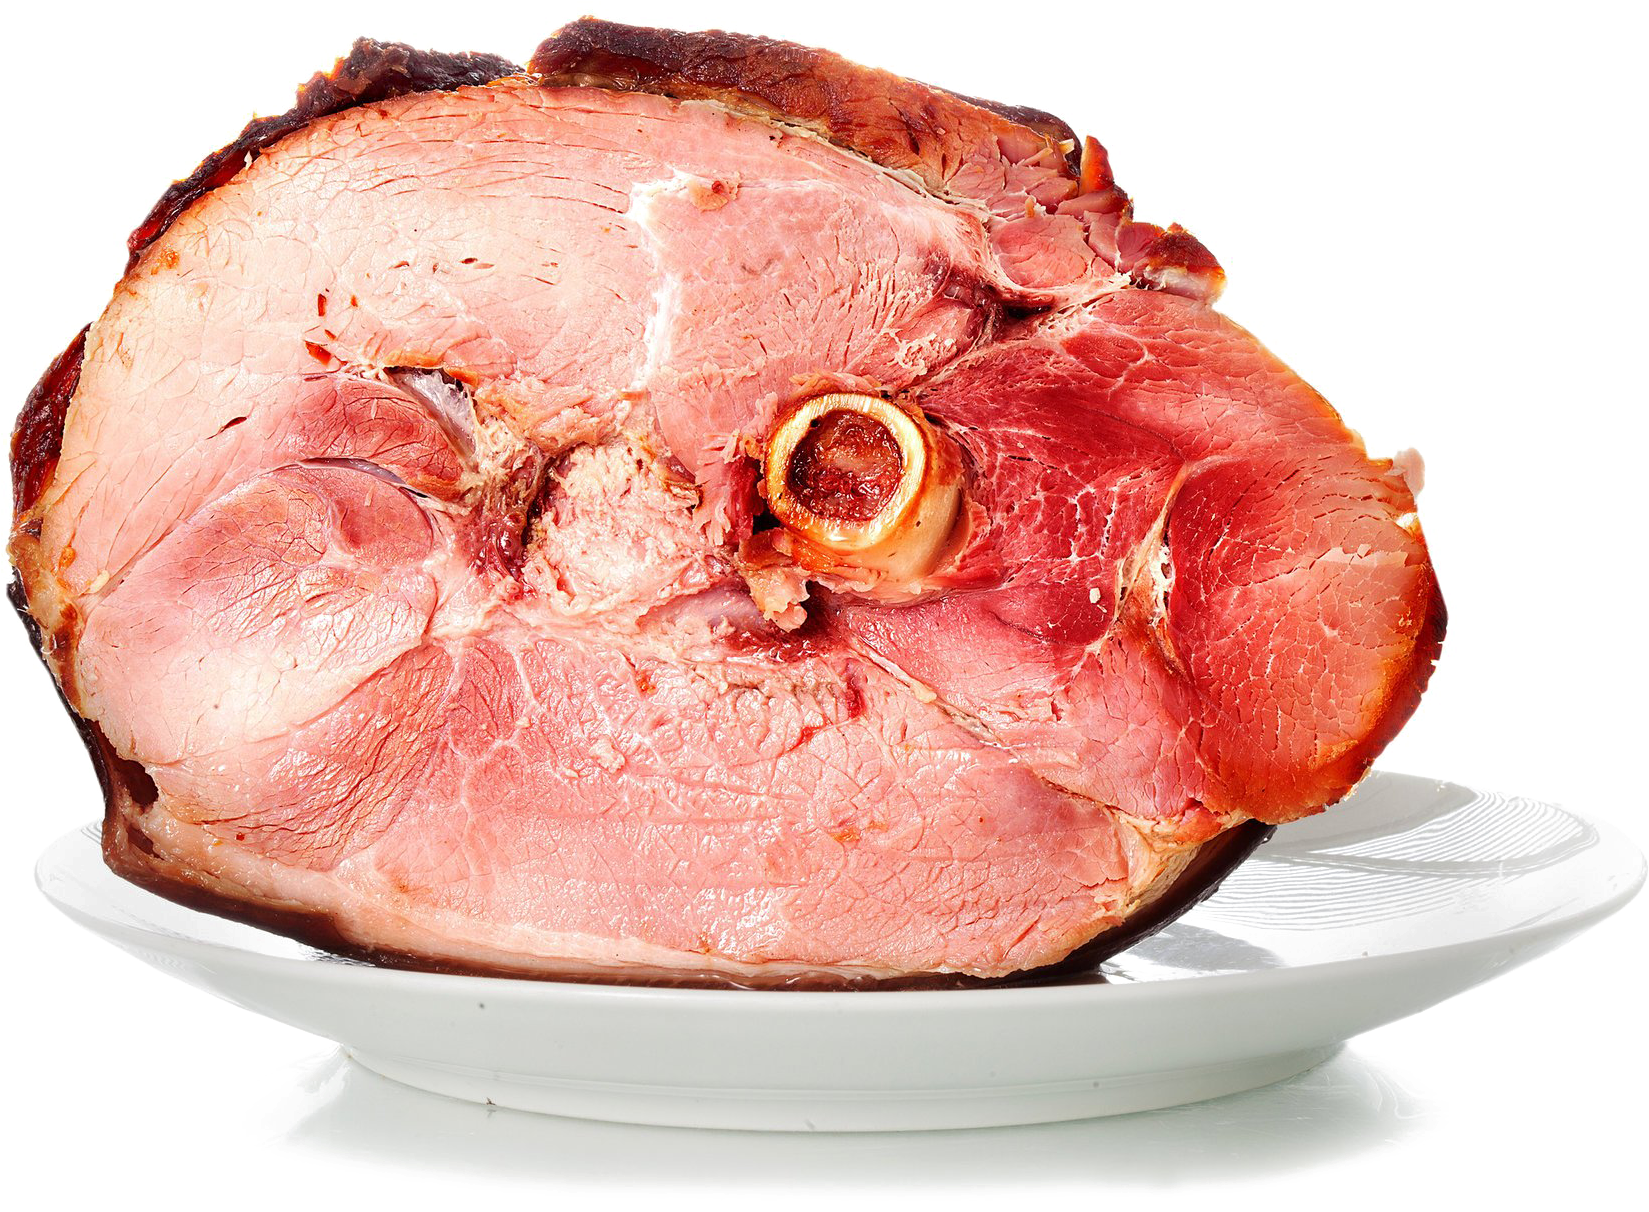 A Piece Of Ham On A Plate